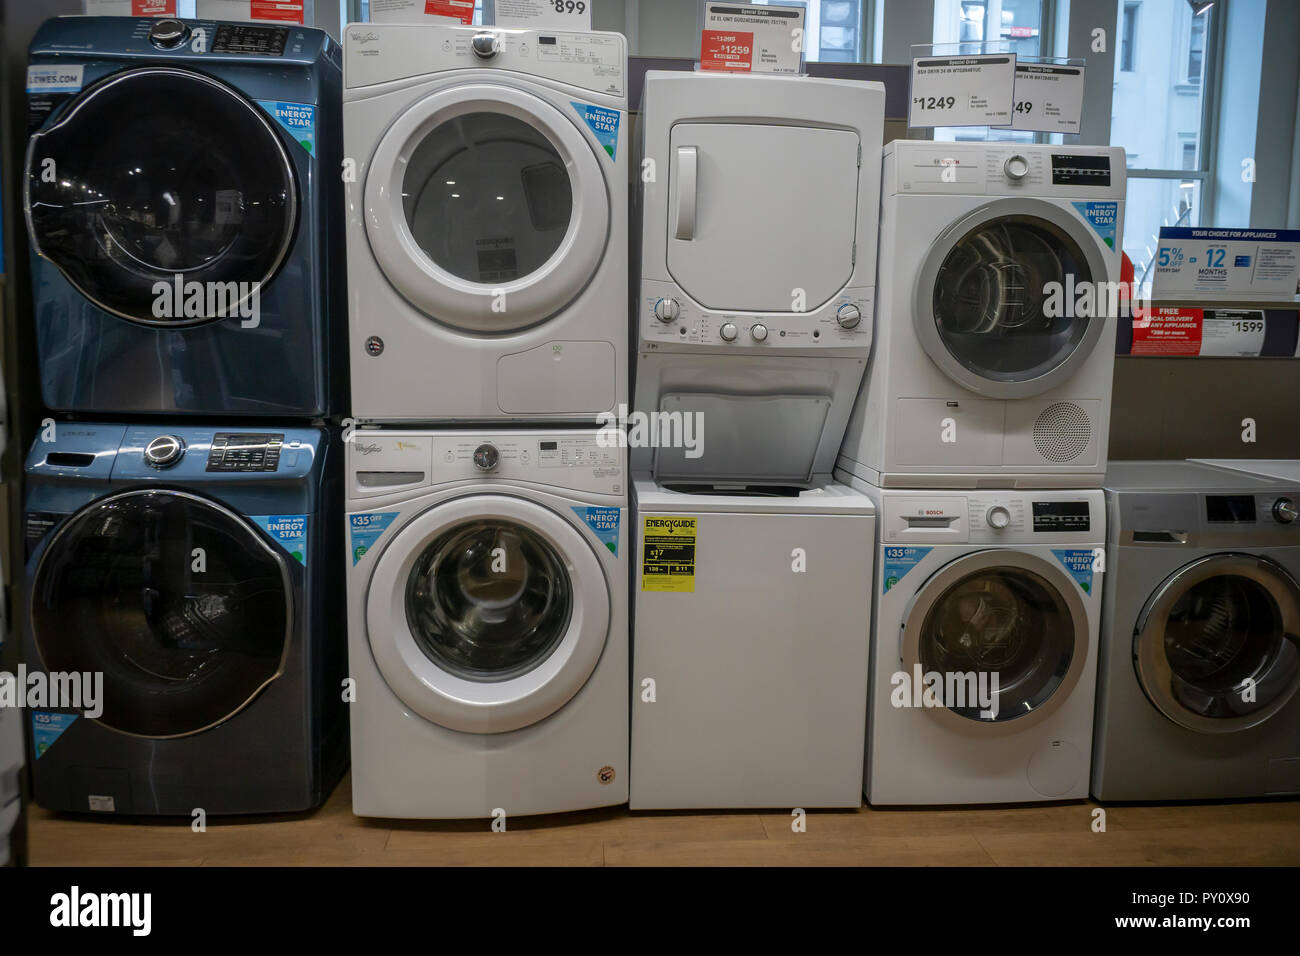 Whirlpool washing machines and dryers, second from left, with other brands  in a hardware store in New York on Monday, October 22, 2018. (Â© Richard B. Levine) Stock Photo